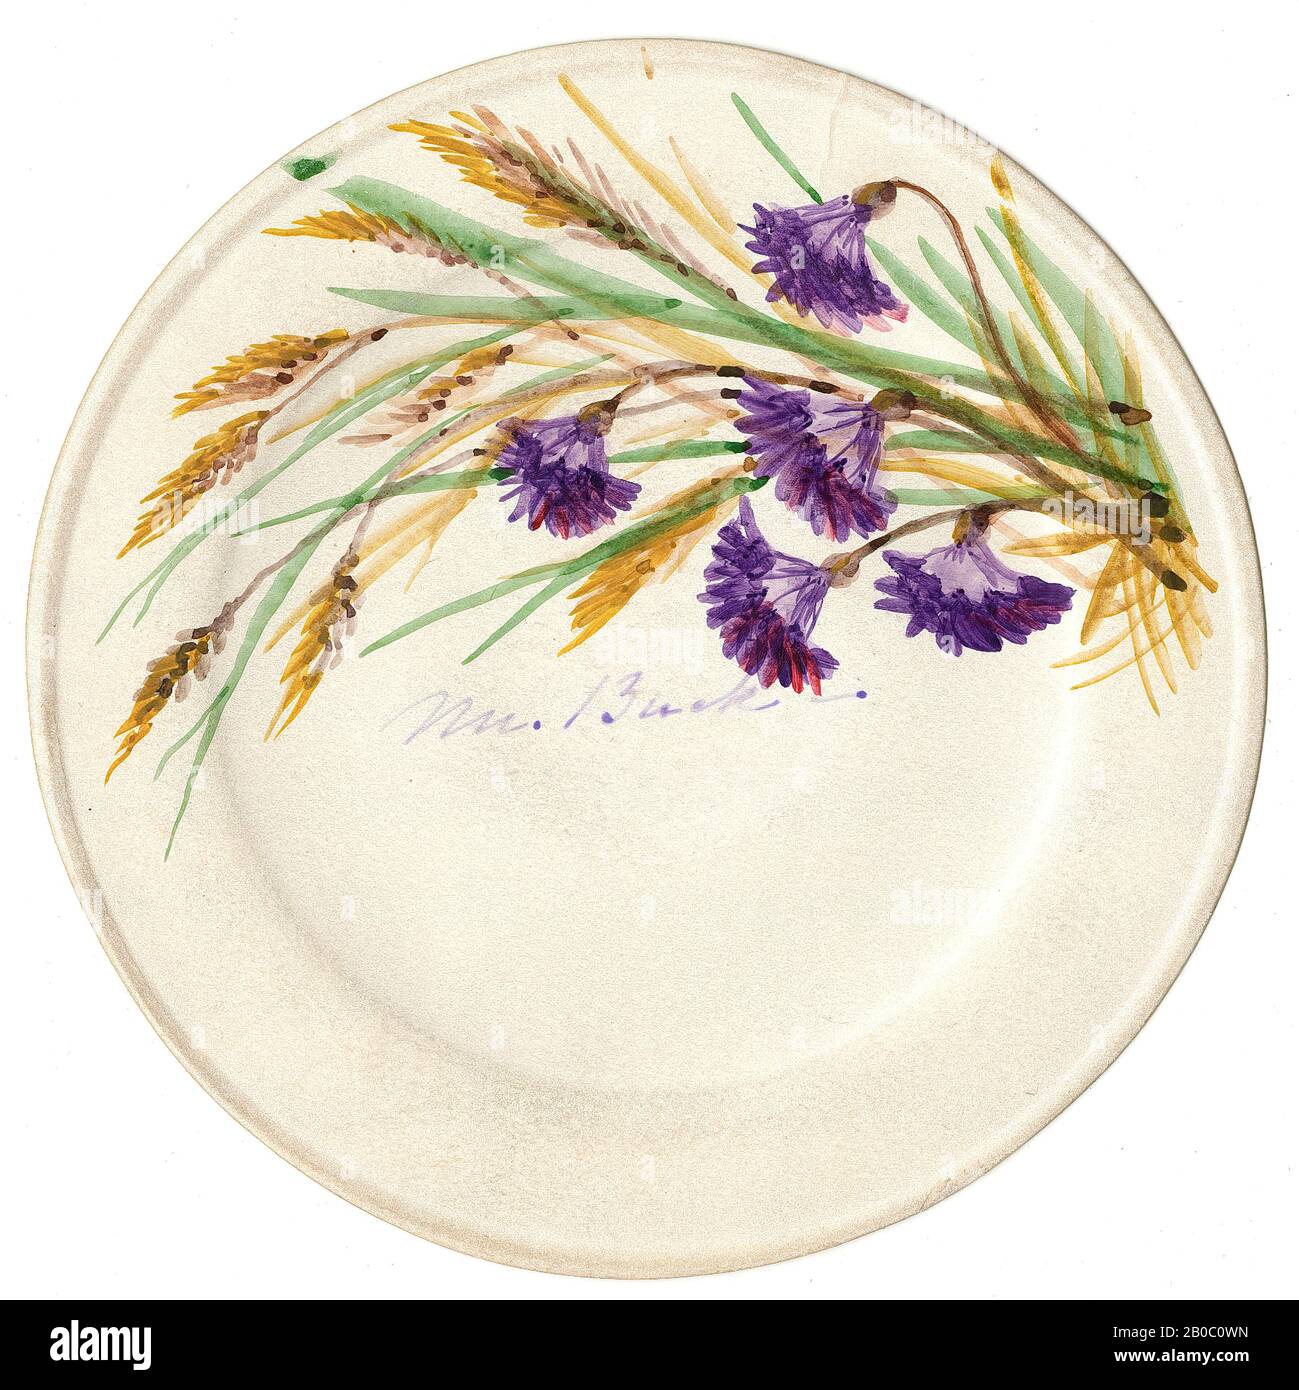 Henrietta Benson Homer, Grasses/Wheat and Purple Flower, n.d., watercolor on paper, 2 13/16 in. (7.14 cm Stock Photo